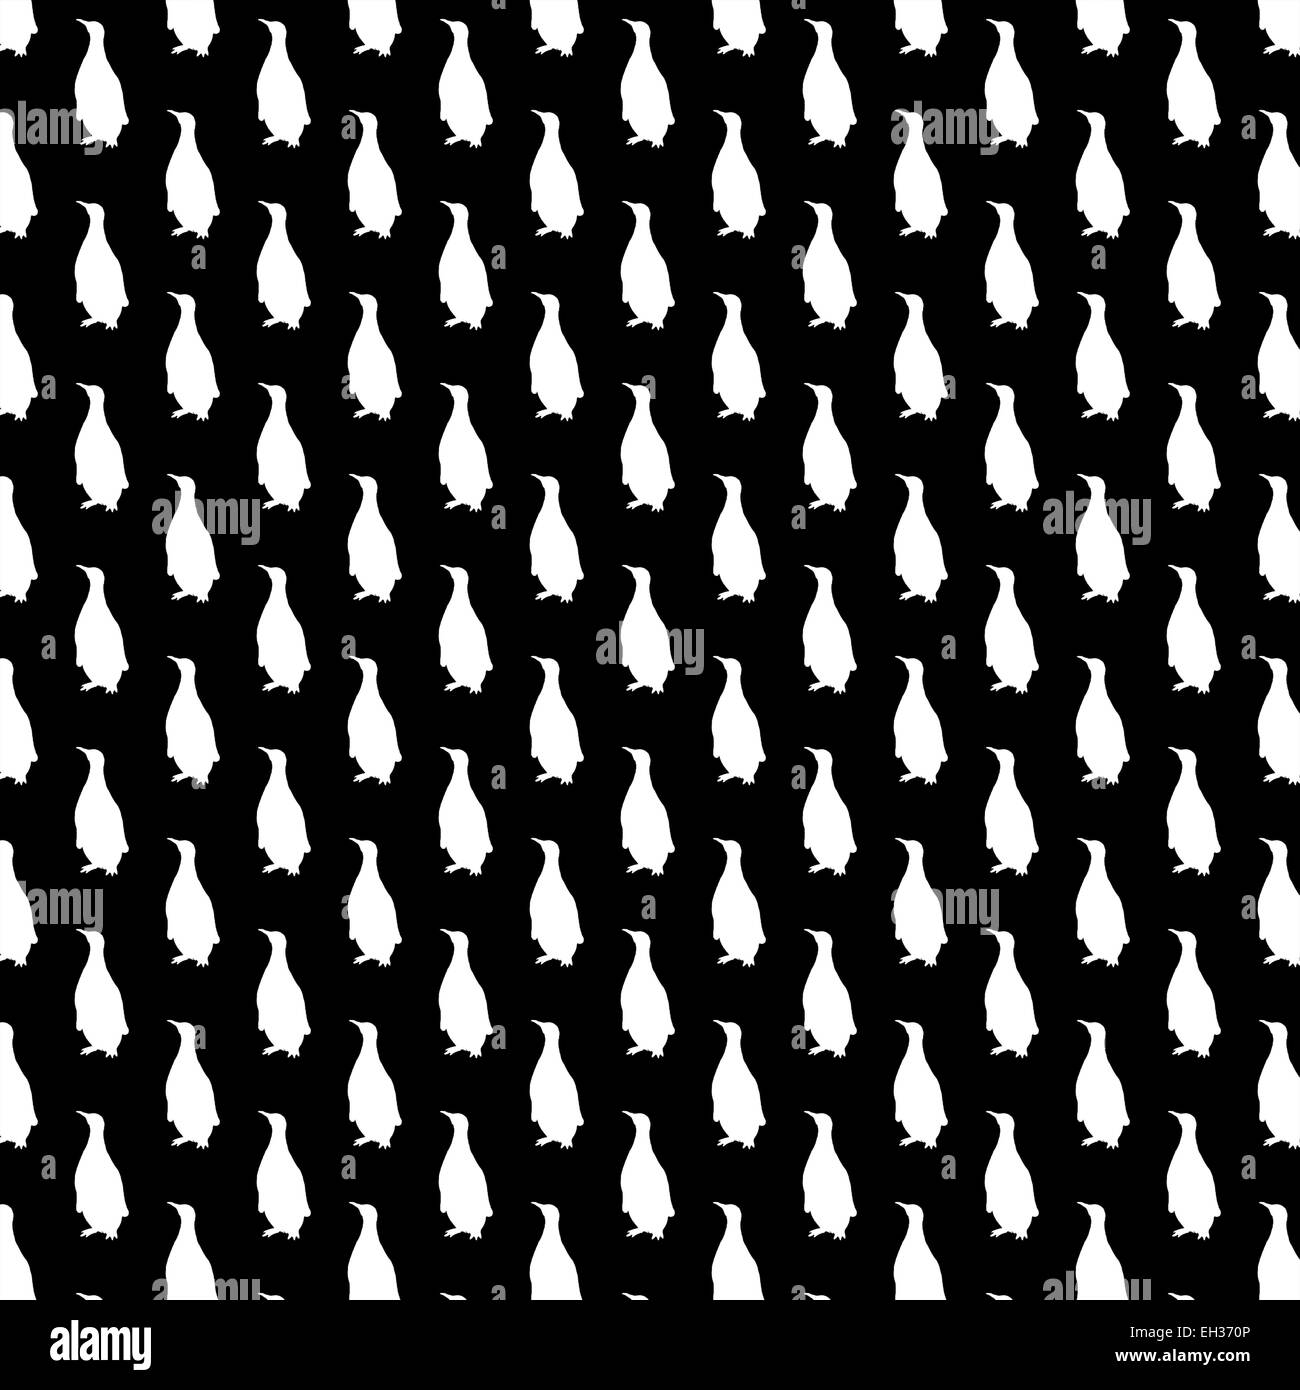 White and Black Penguin Polka Dots Background Penguins Pattern Texture Stock Photo